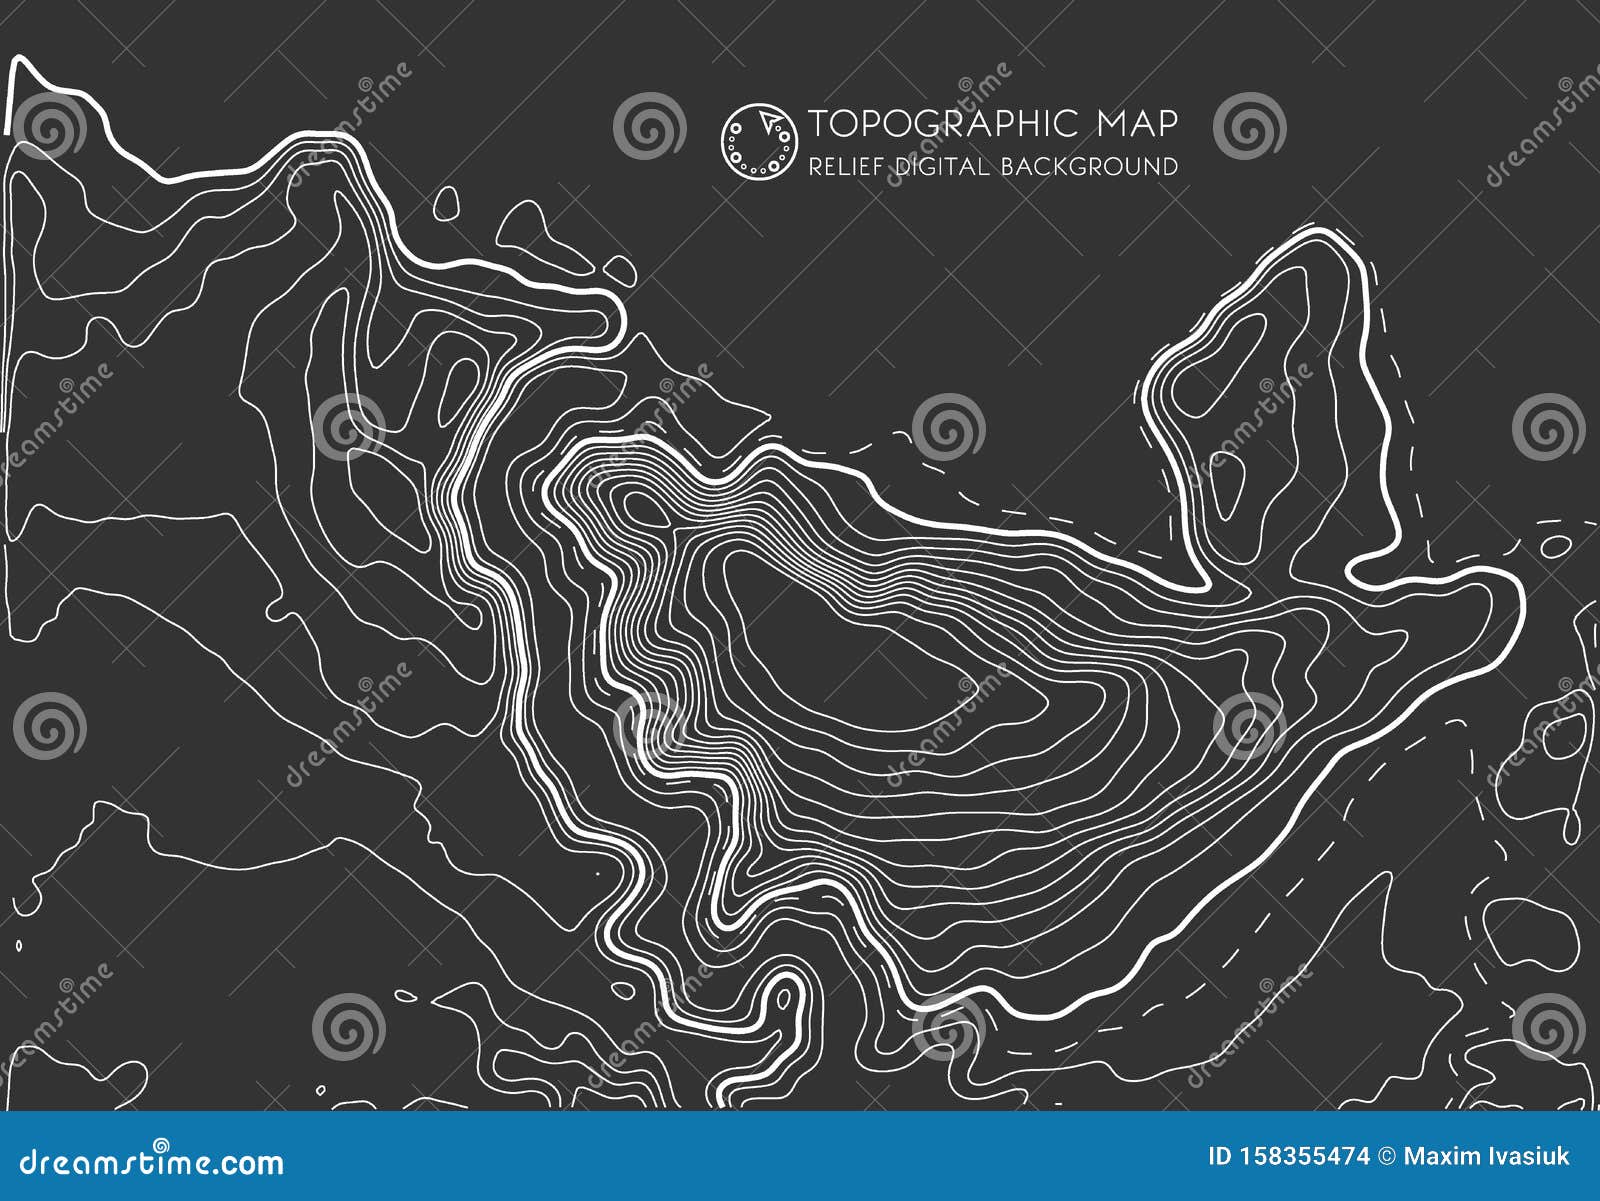 map line of topography.  abstract topographic map concept with space for your copy